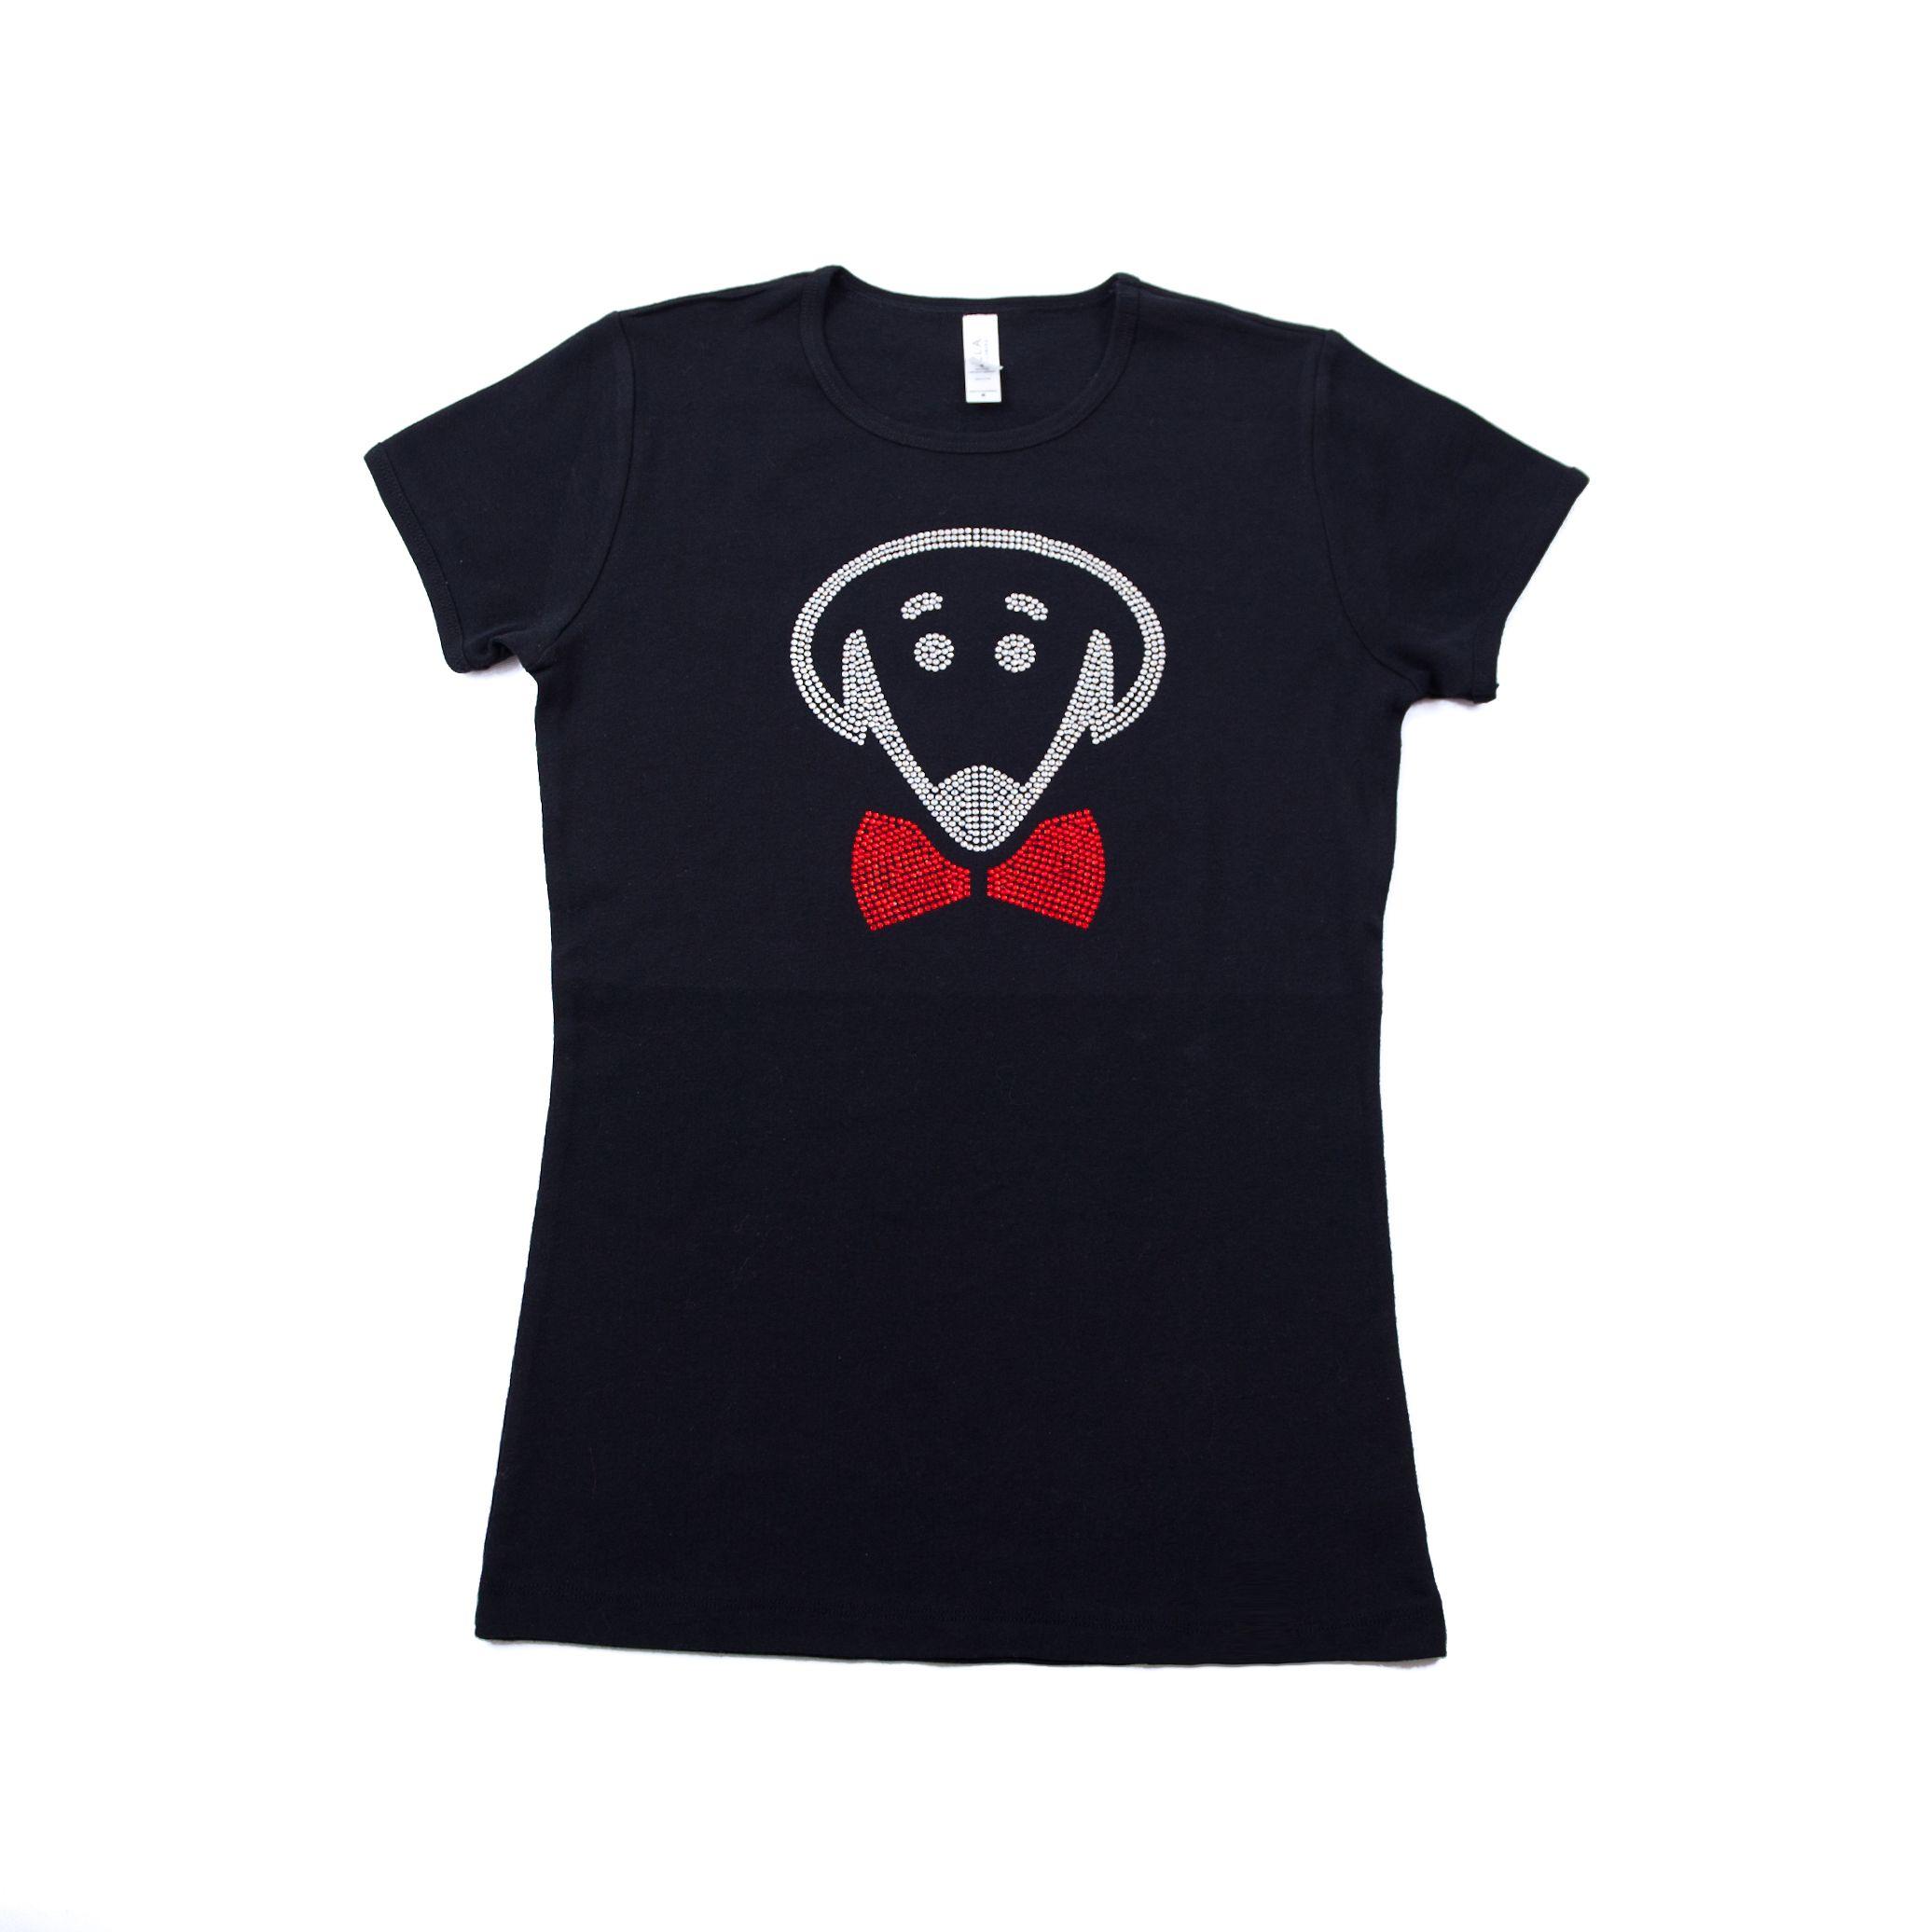 Black Face Logo - Black shirt with bedazzled Bow Ties dog face logo - Bow Ties